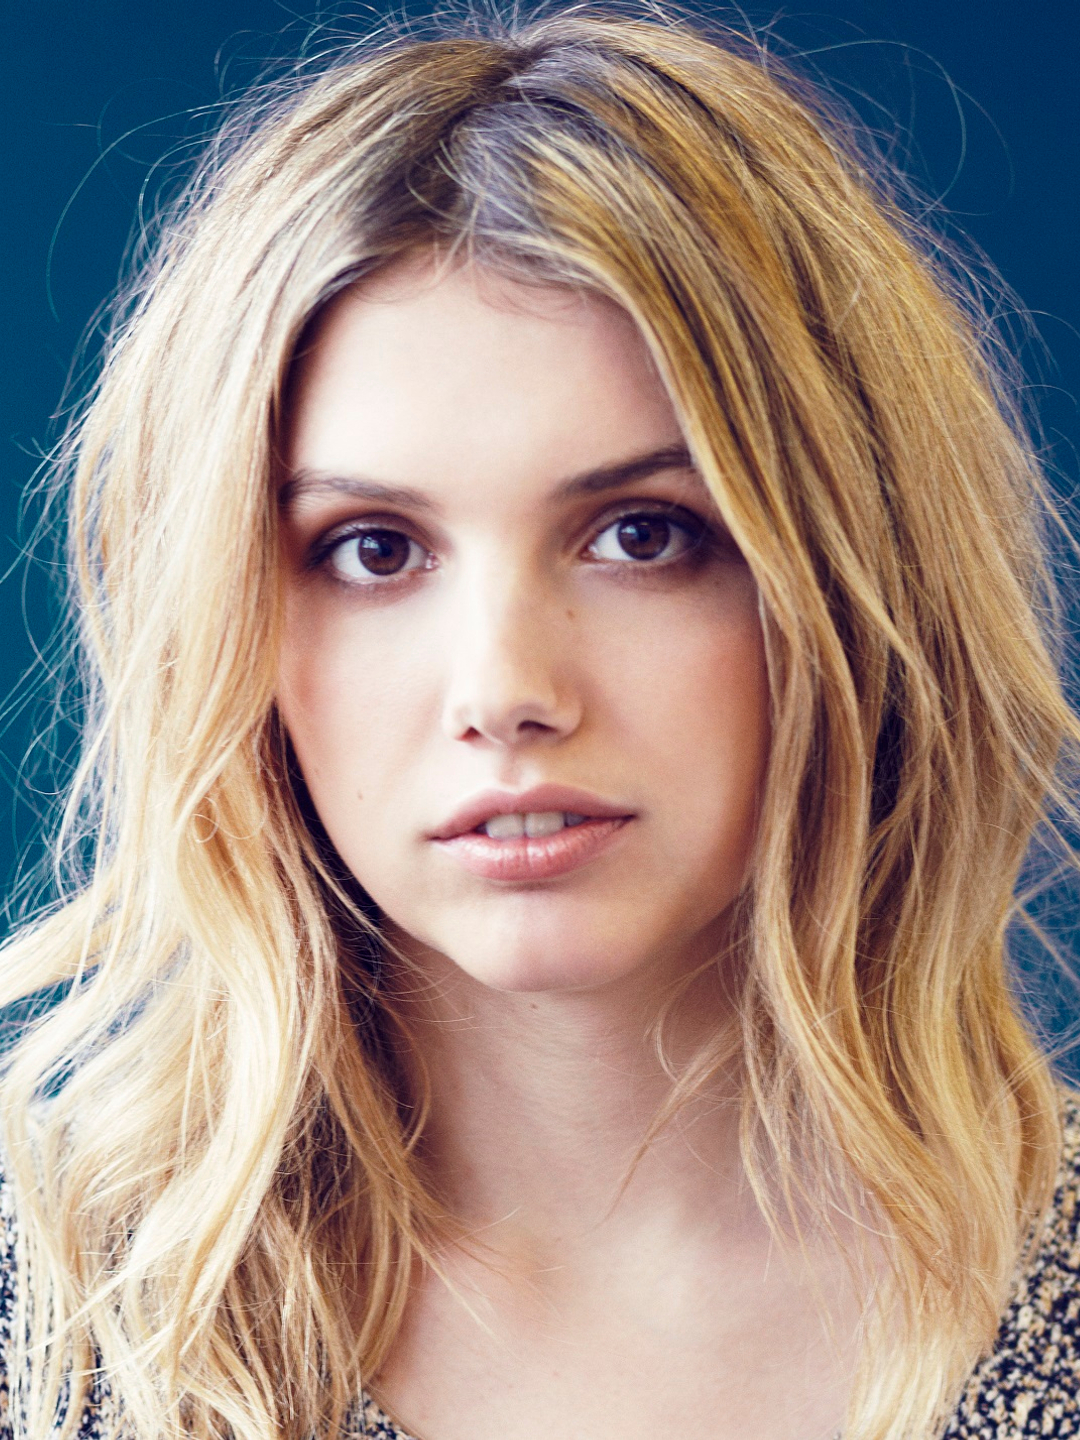 Hannah Murray who is her mother